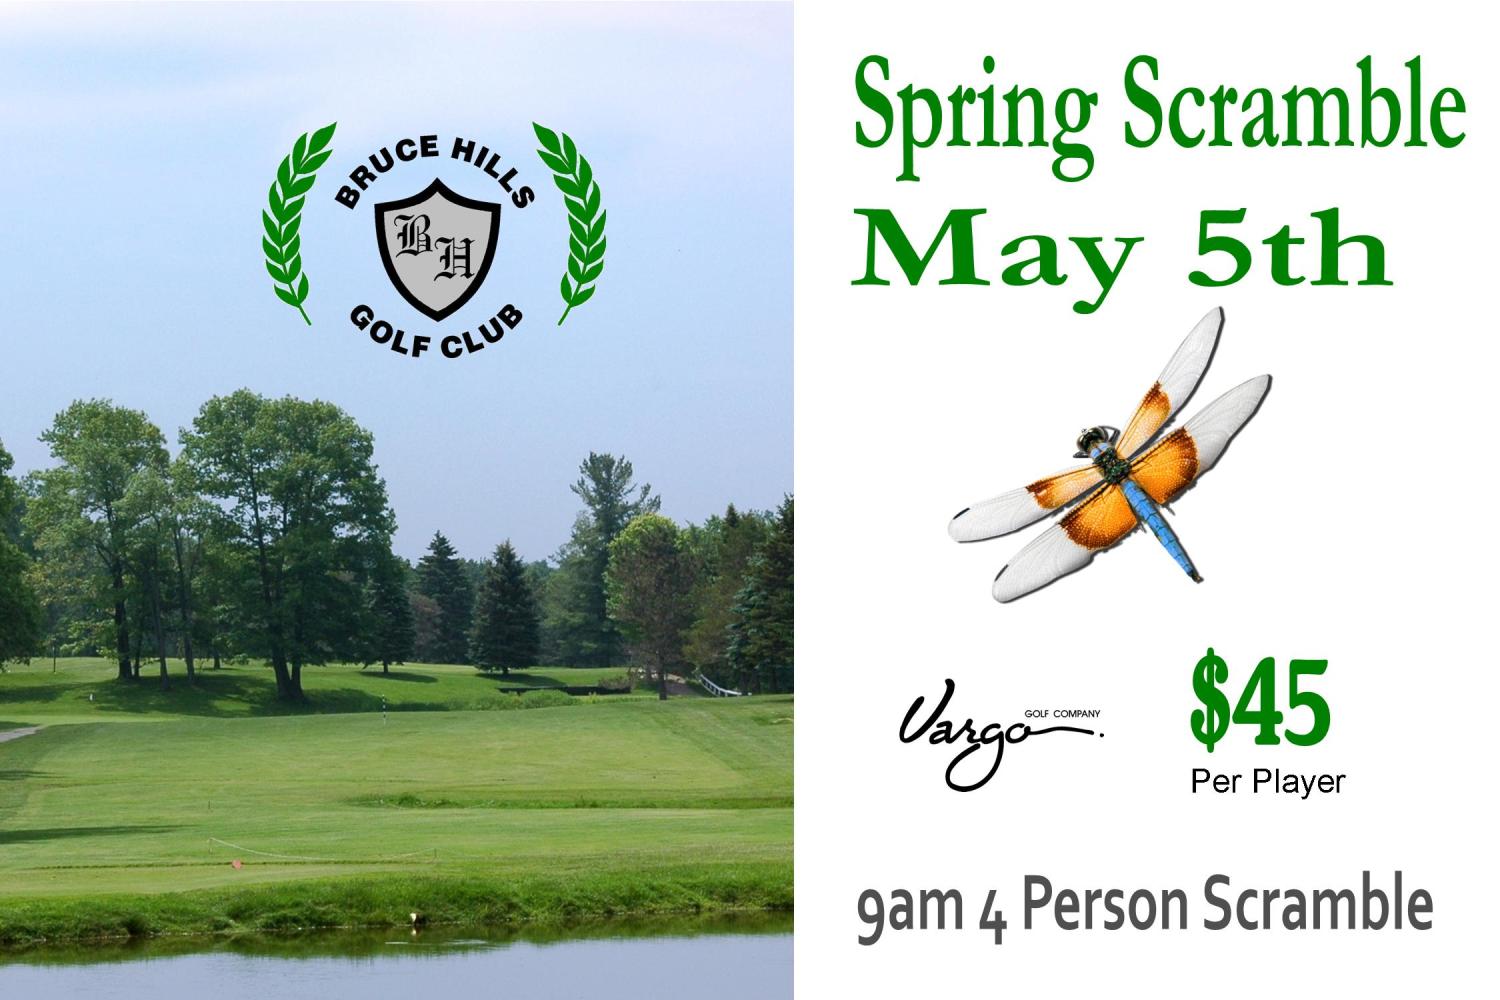 Spring Scramble May 5th at Bruce Hills Golf Course in Roemo